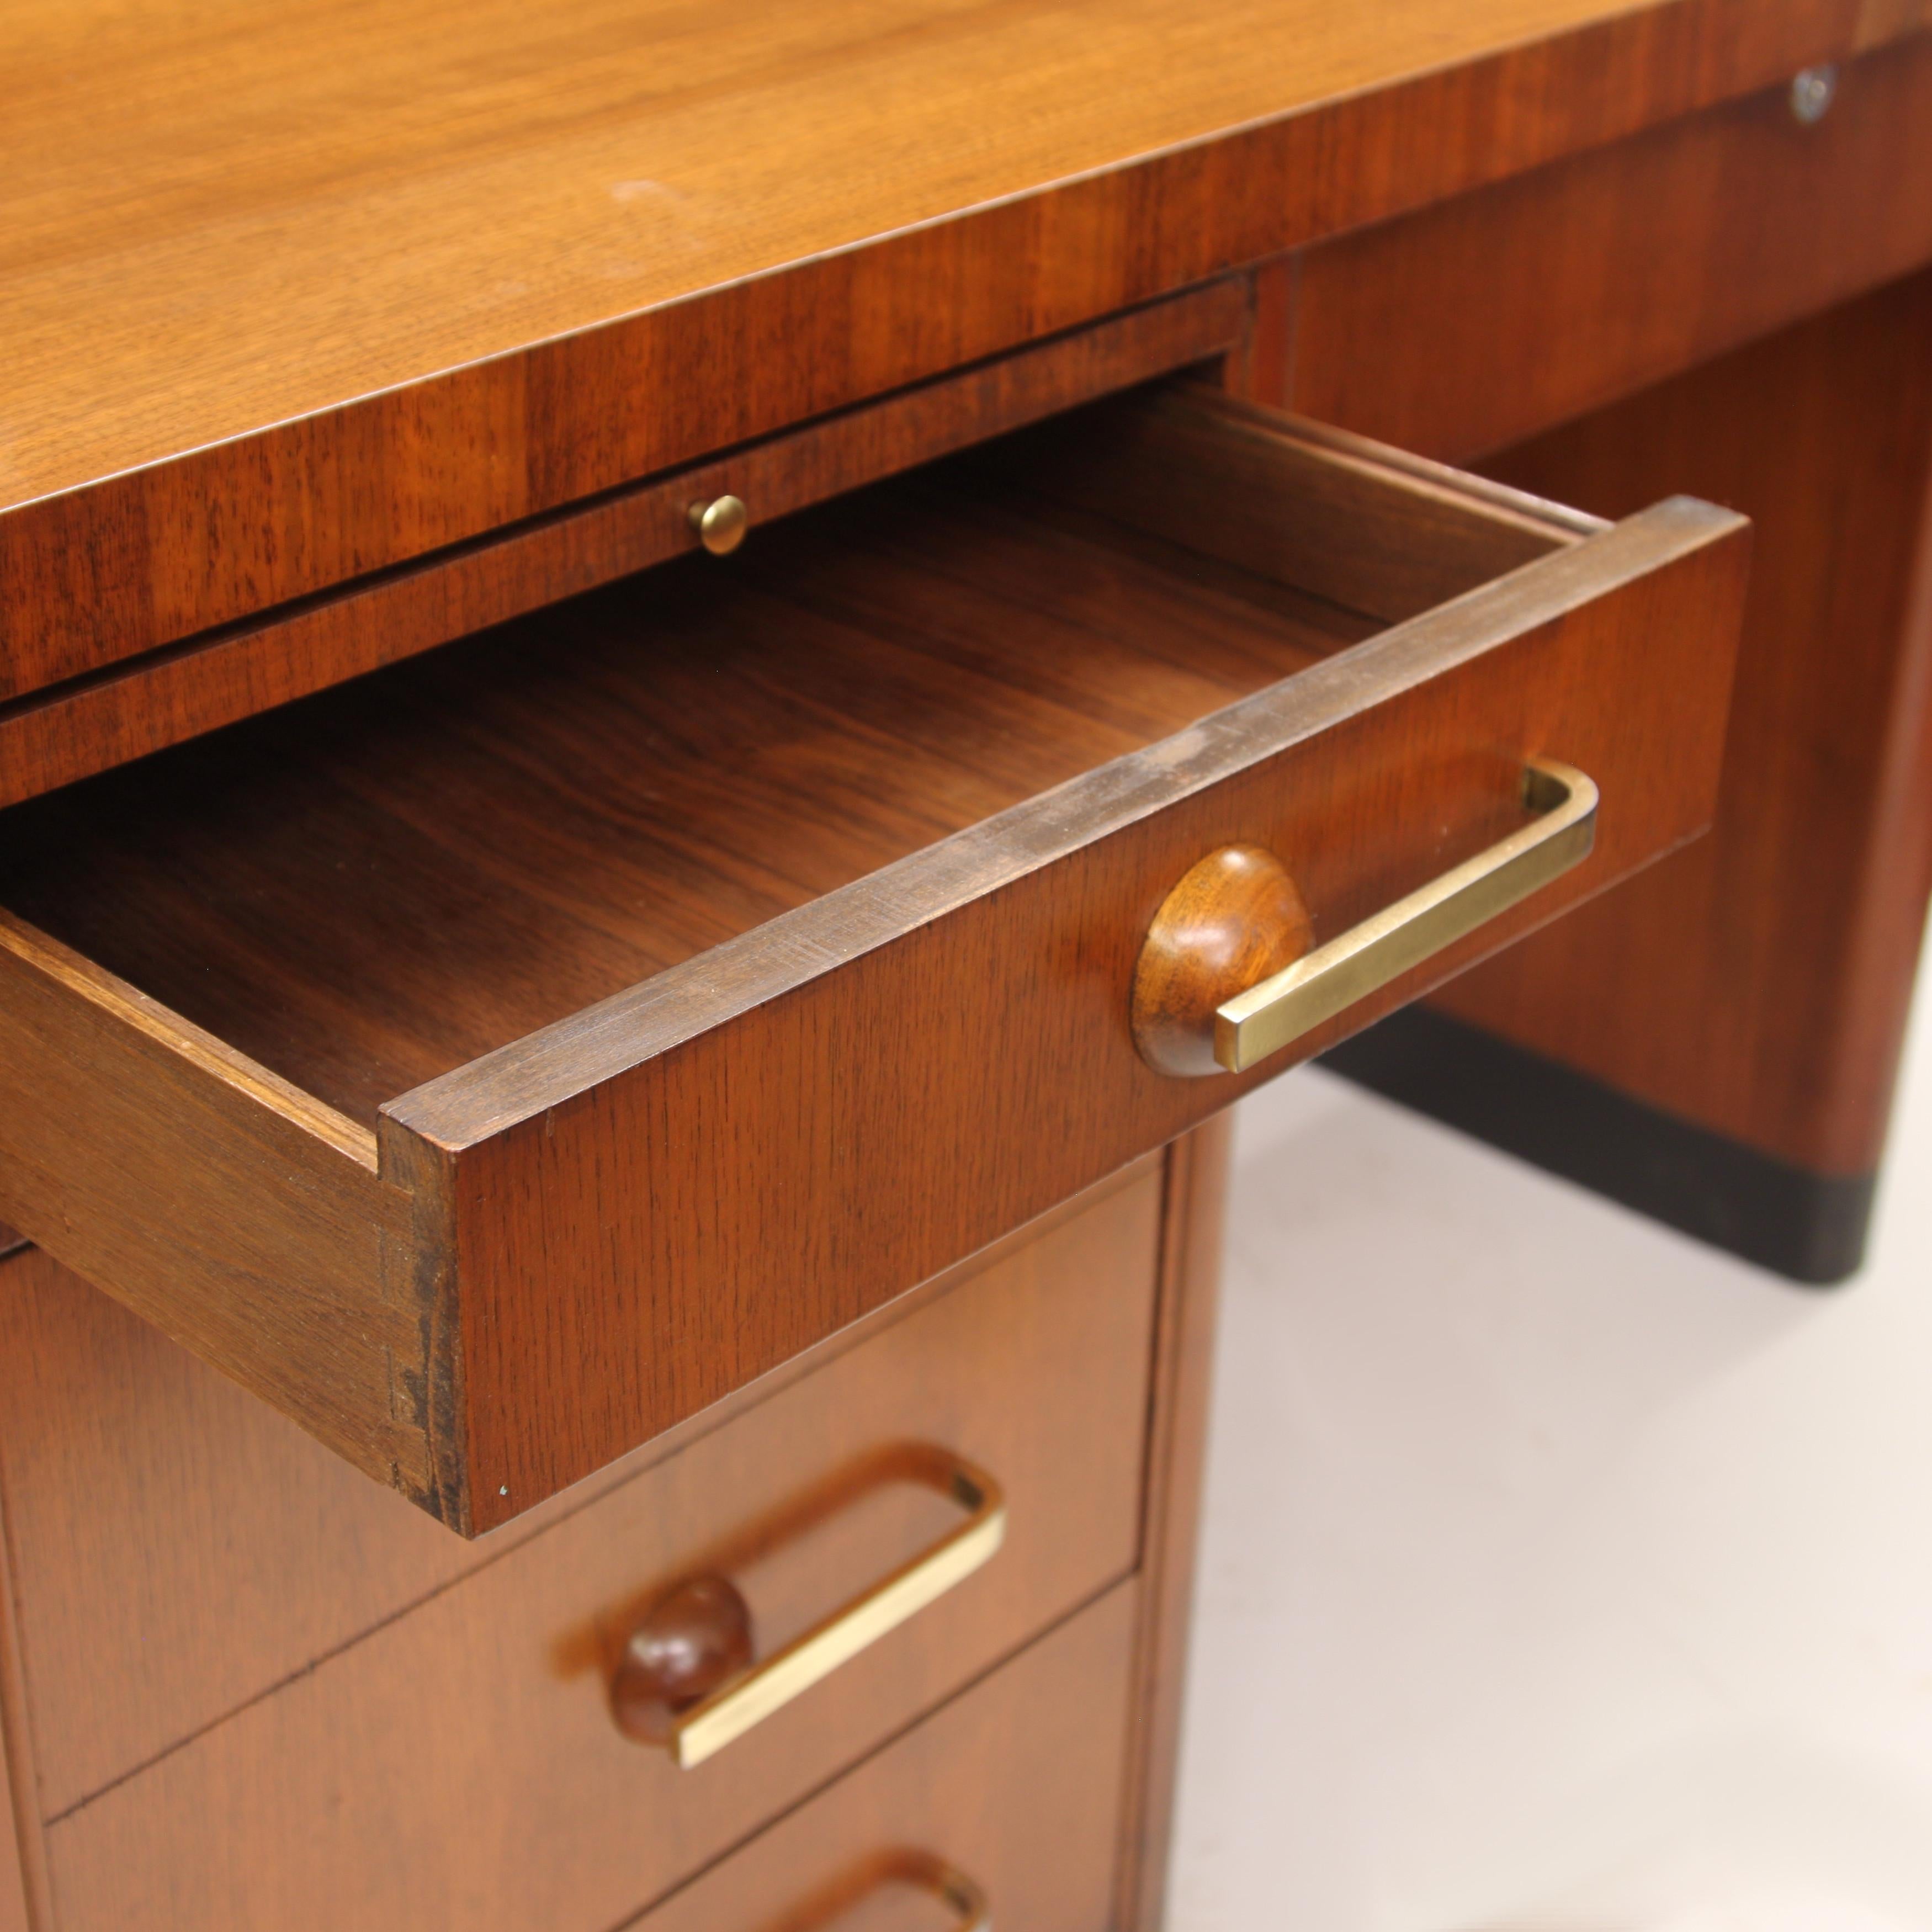 Rare 1950s Mid-Century Modern Art Deco Inspired Walnut Rounded Top Desk In Good Condition For Sale In Lafayette, IN